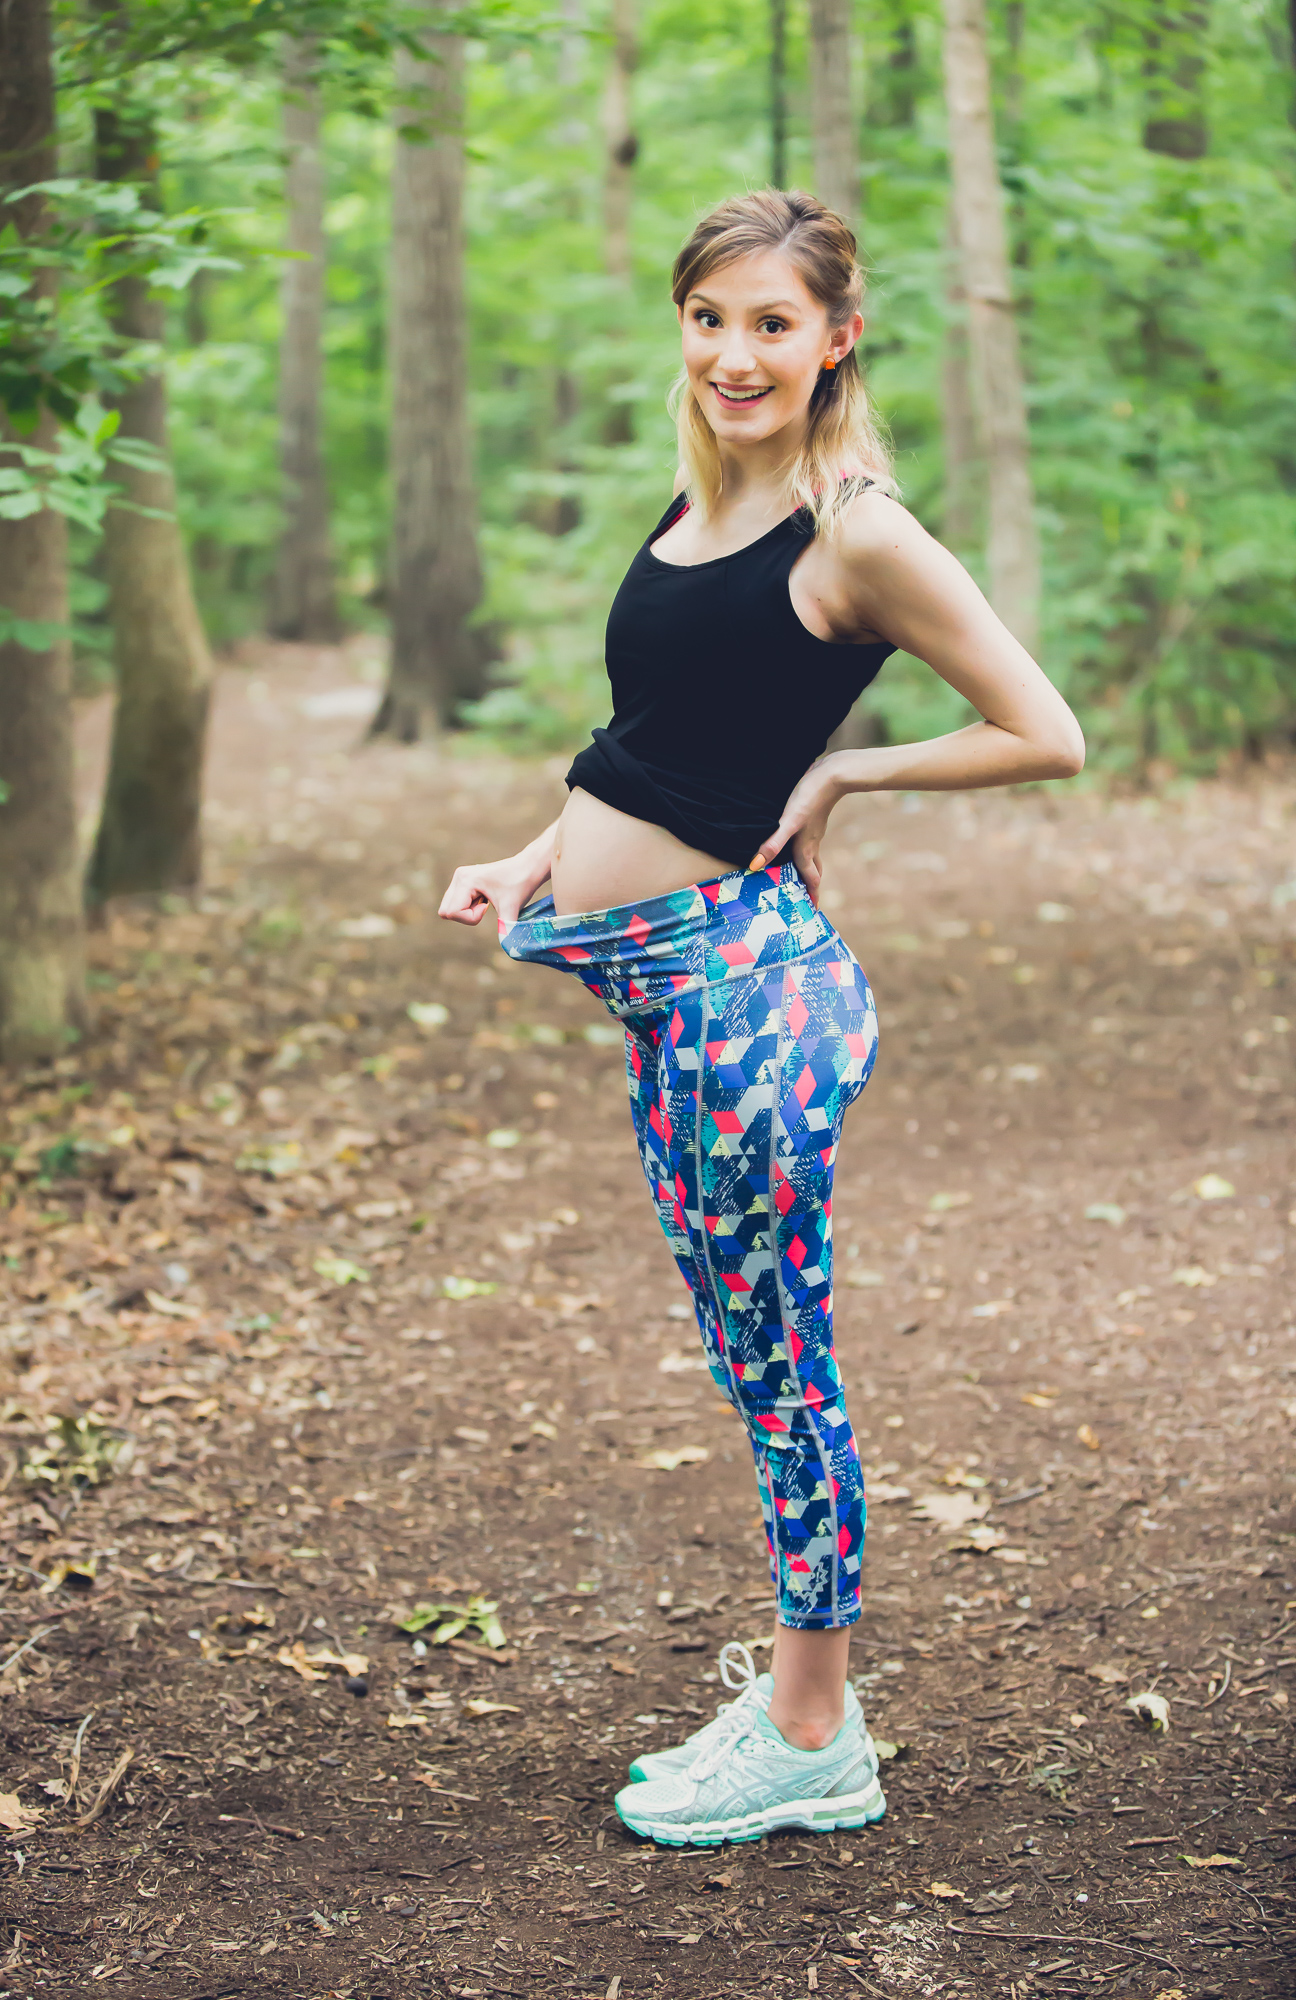 Lifestyle and fashion blogger Jessica Linn from Linn Style wearing athletic maternity wear from POP! Maternity a company from Australia. A geometric patterned capri yoga pants and a black singlet.